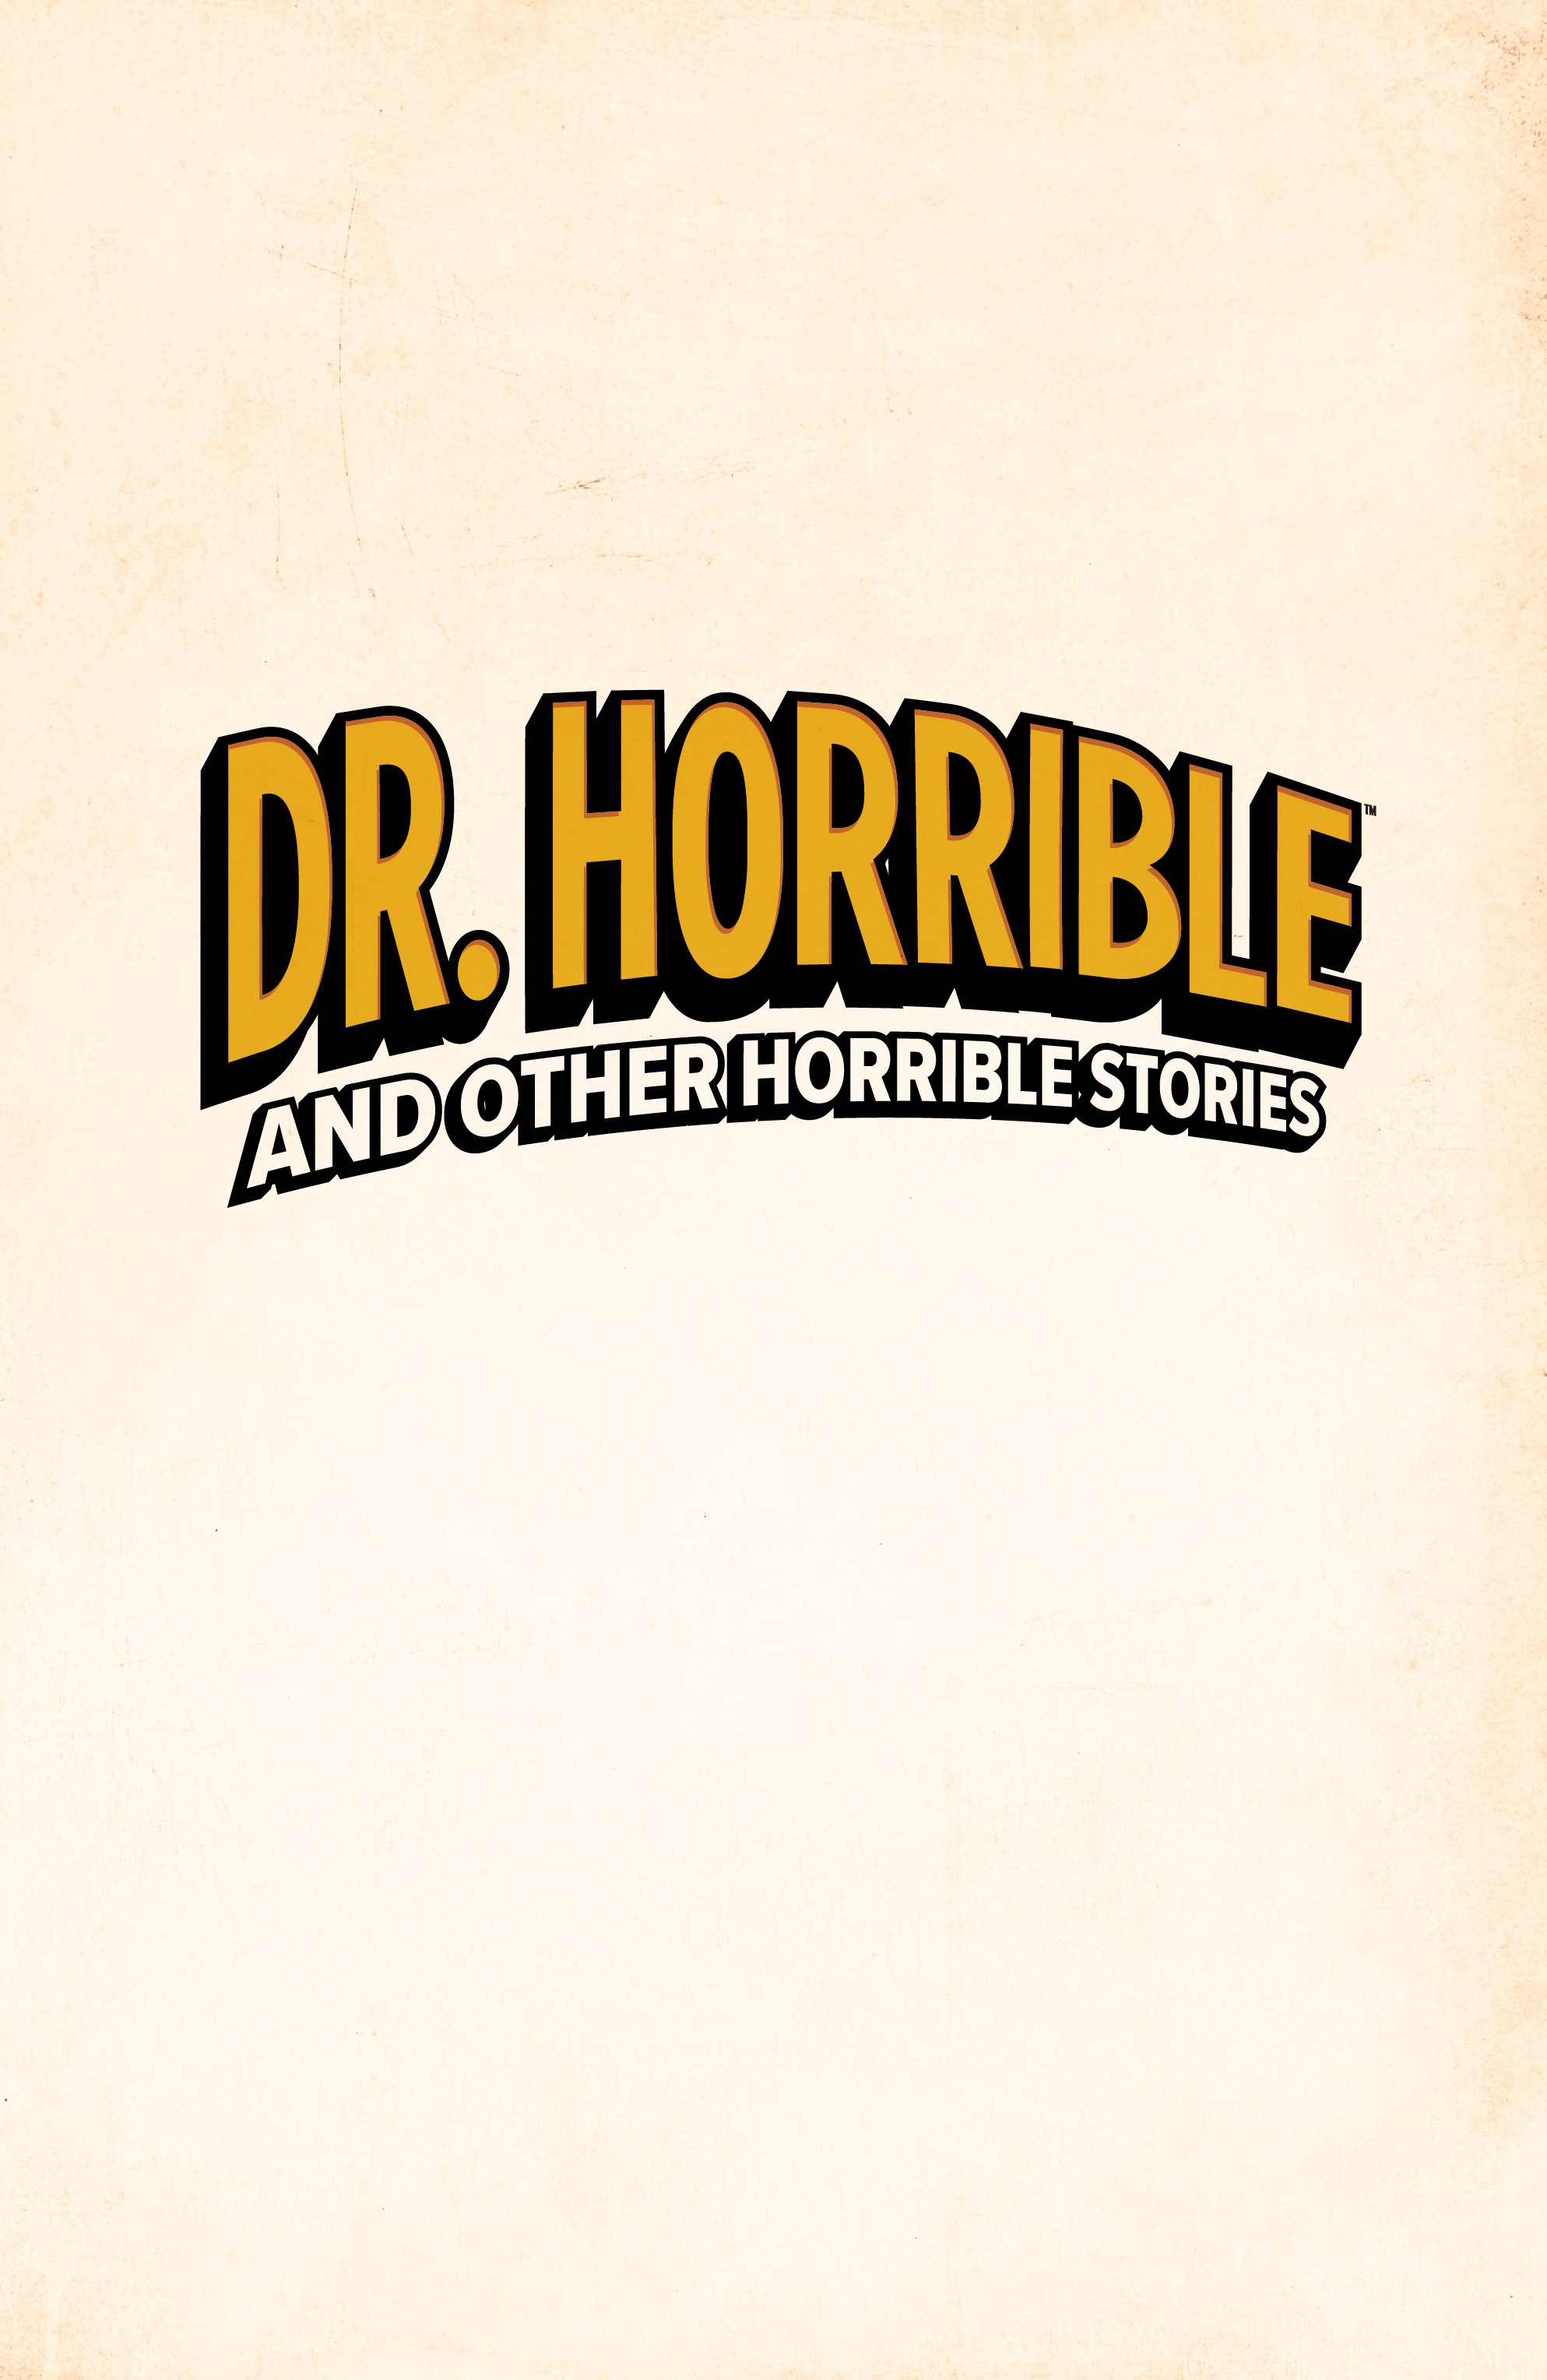 Read online Dr. Horrible and Other Horrible Stories comic -  Issue # TPB - 2